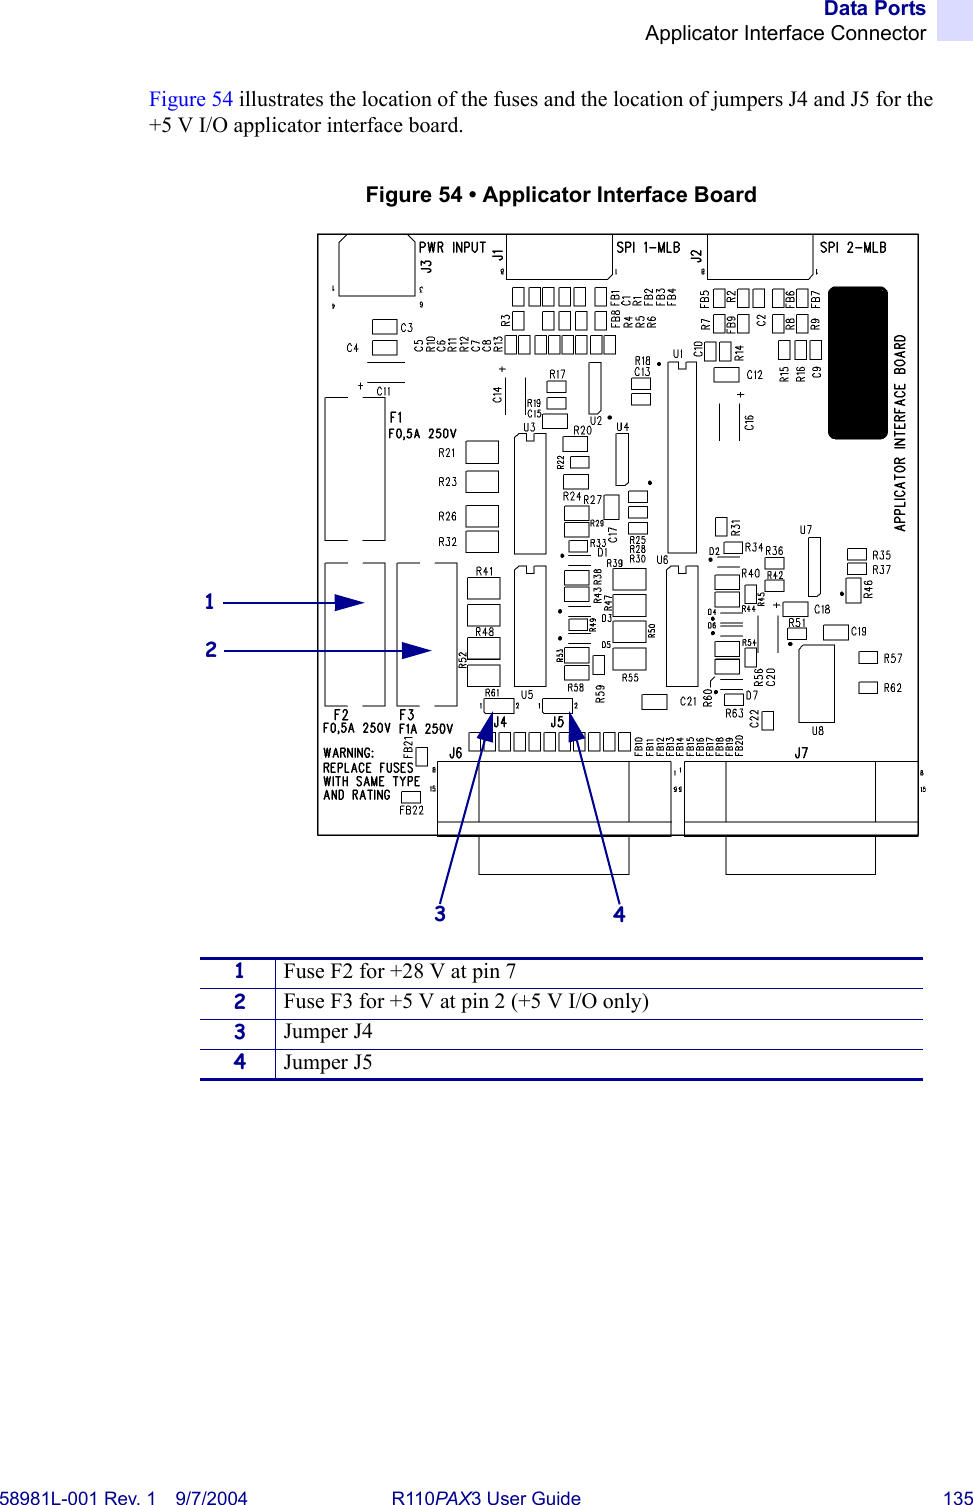 Data PortsApplicator Interface Connector58981L-001 Rev. 1 9/7/2004 R110PAX3 User Guide 135Figure 54 illustrates the location of the fuses and the location of jumpers J4 and J5 for the +5 V I/O applicator interface board.Figure 54 • Applicator Interface Board1Fuse F2 for +28 V at pin 72Fuse F3 for +5 V at pin 2 (+5 V I/O only)3Jumper J44Jumper J51234